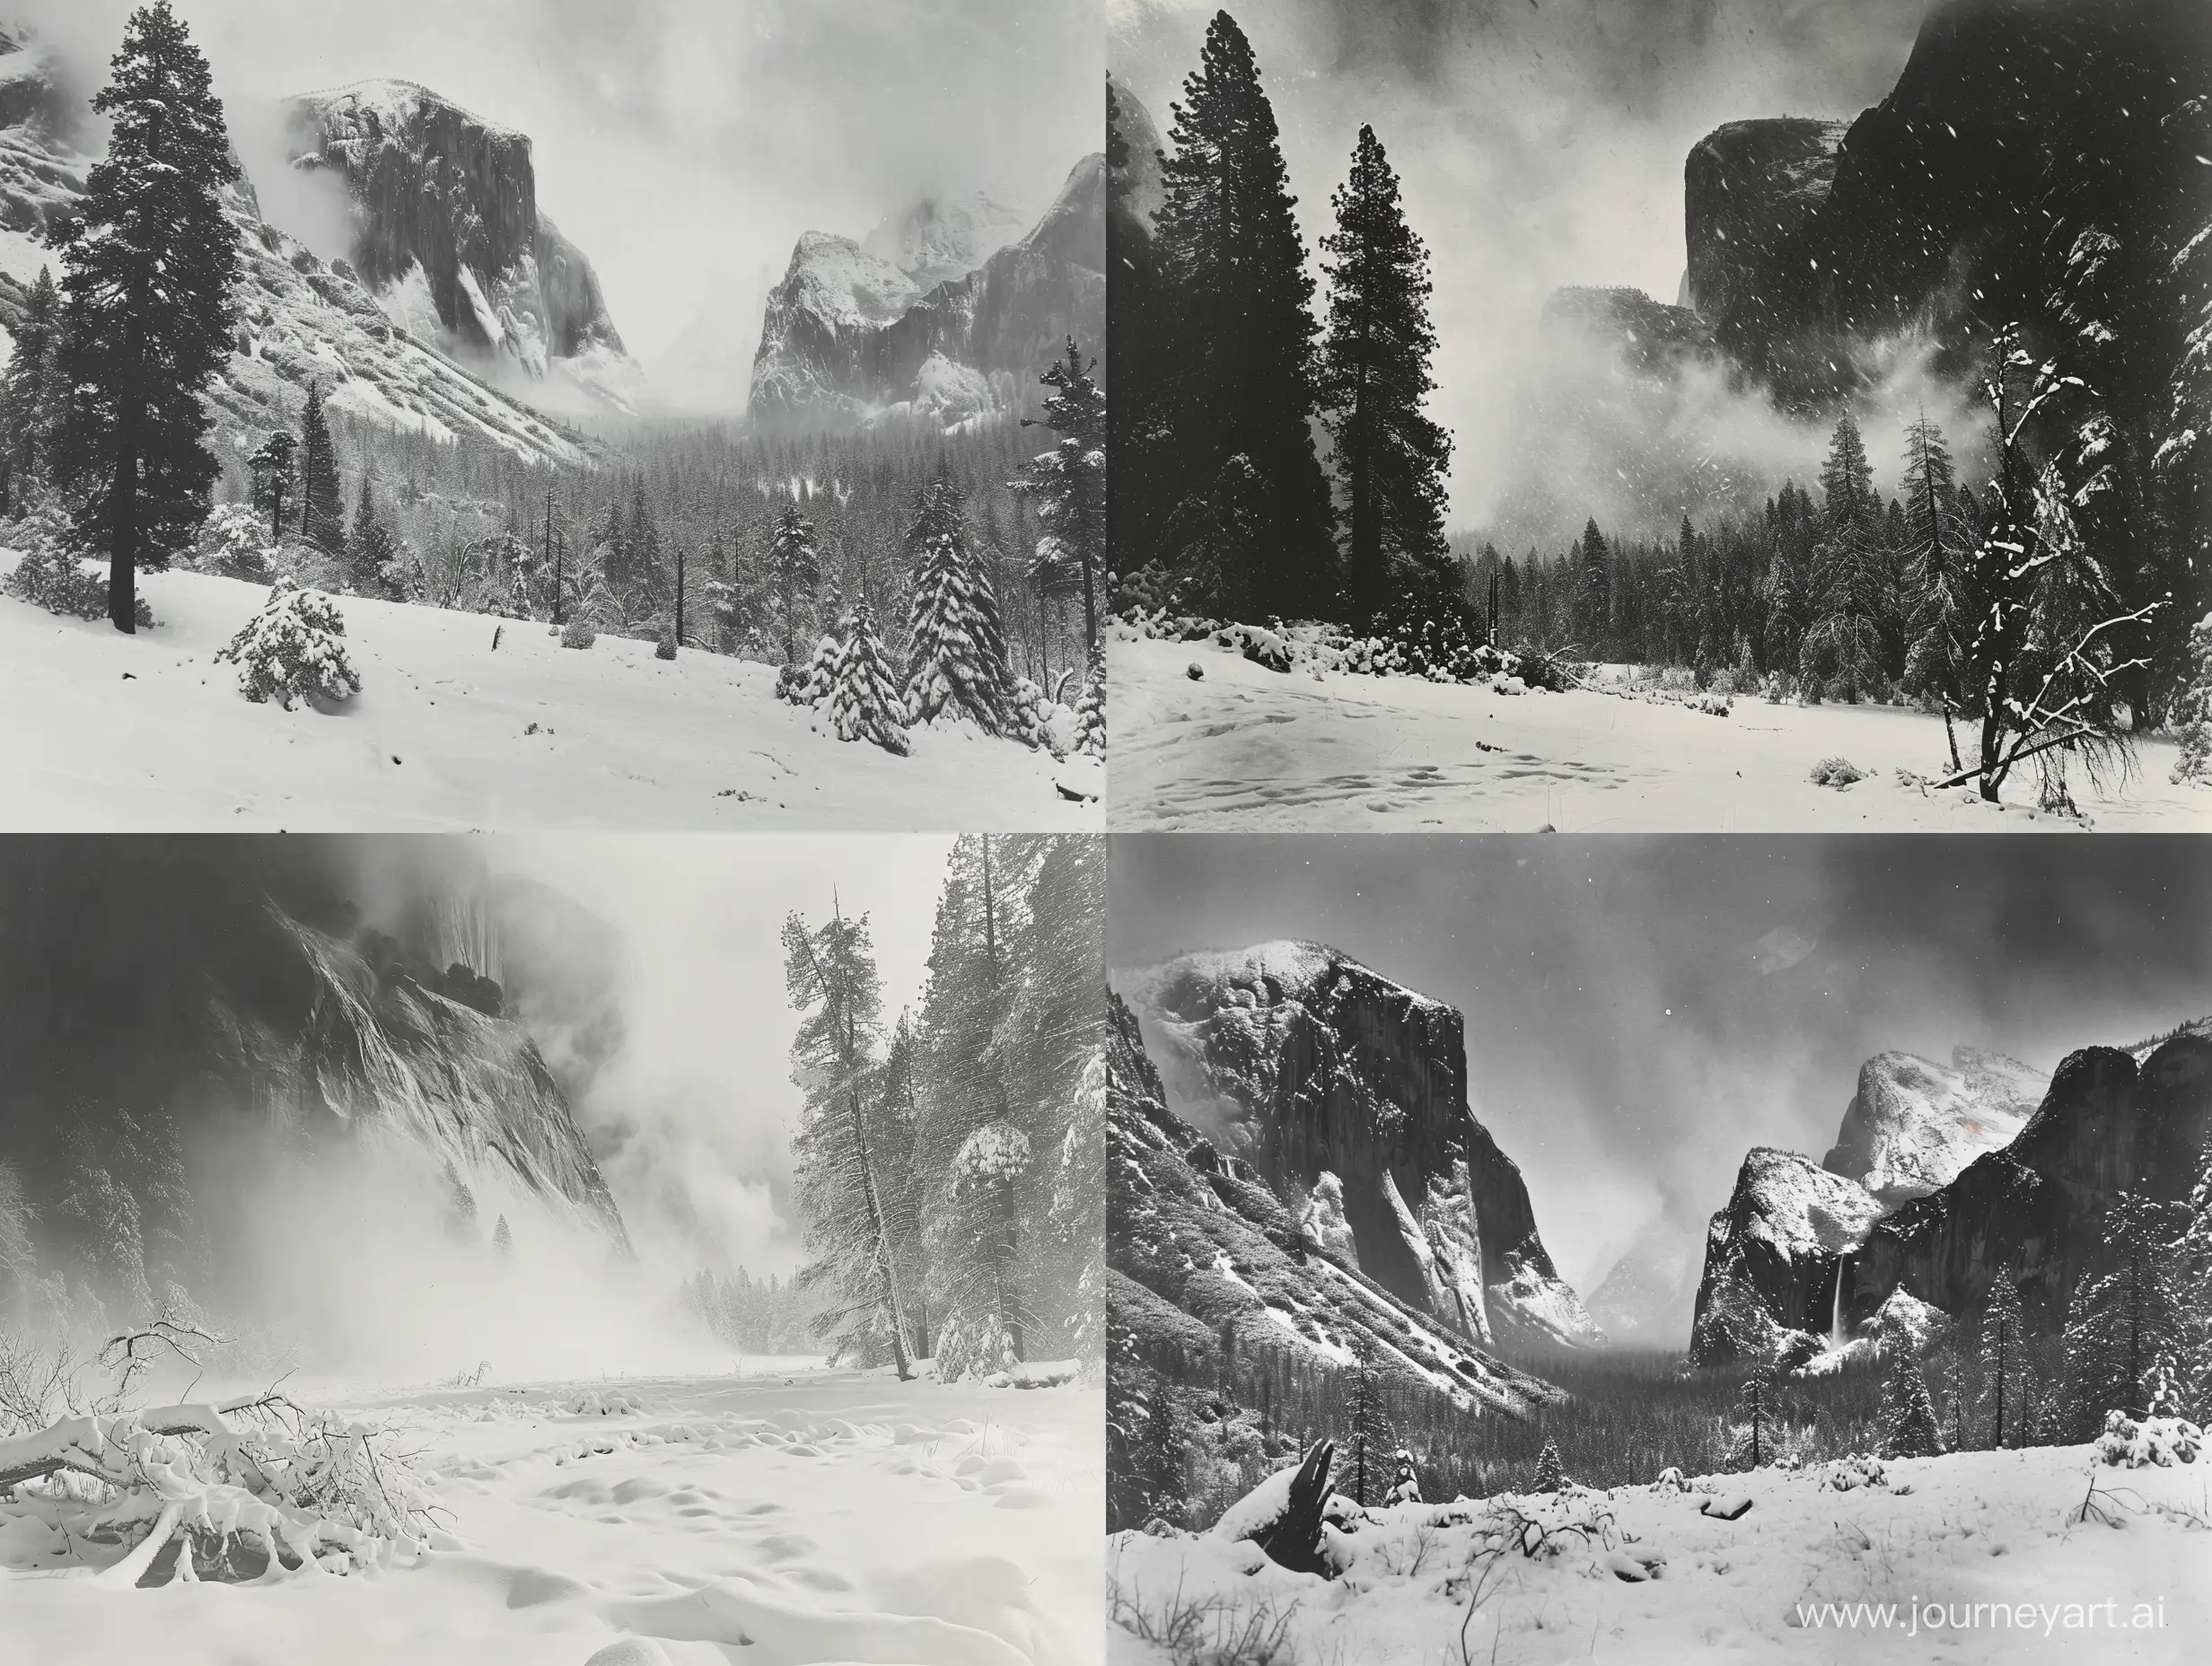 Clearing-Winter-Storm-in-Yosemite-National-Park-1937